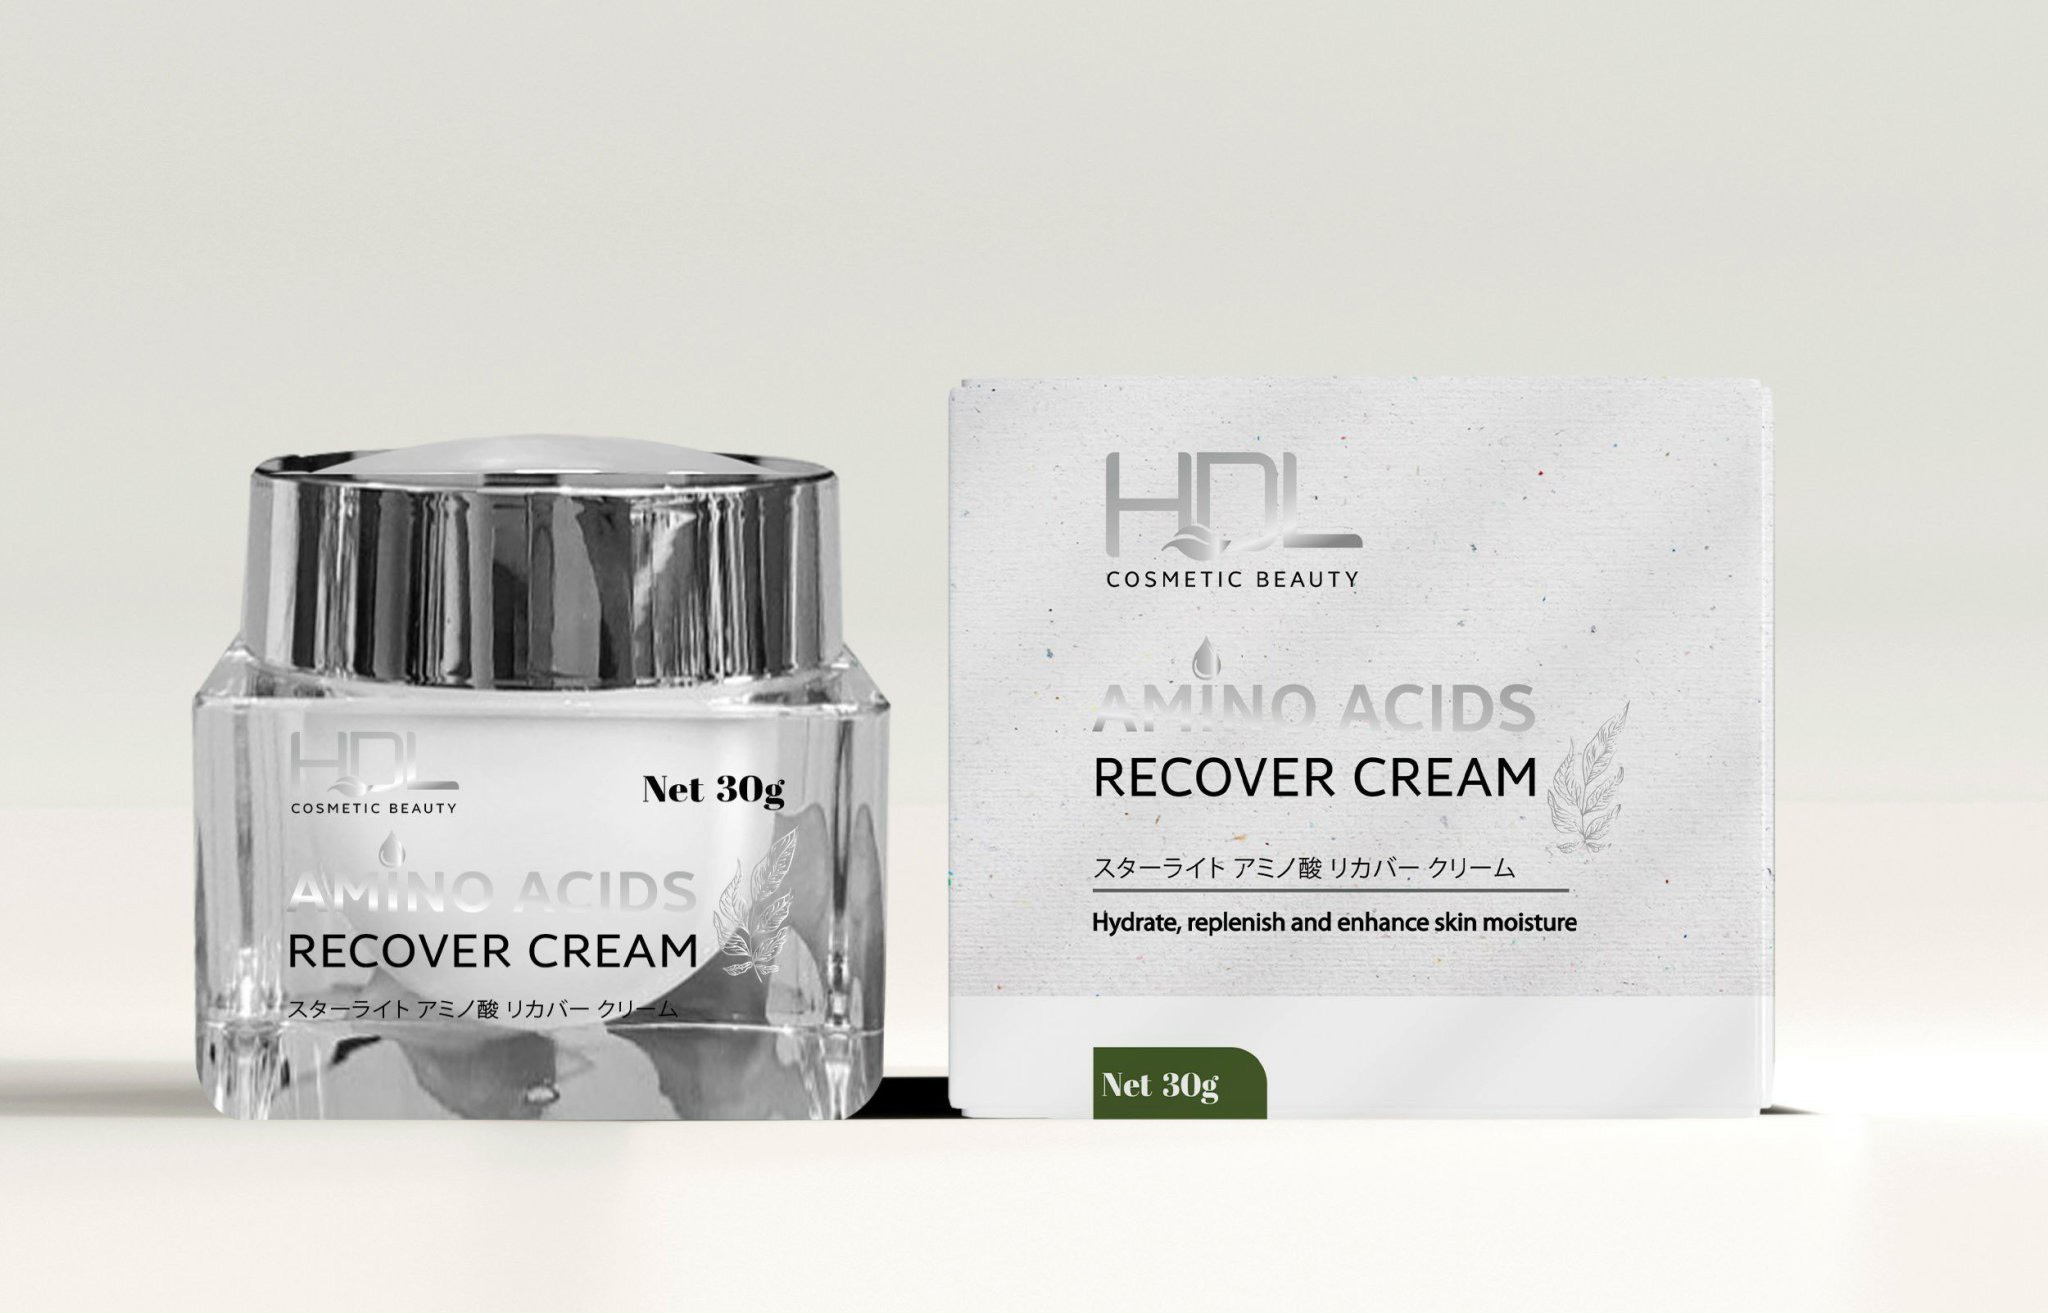 HDL COSMETIC BEAUTY AMINO ACIDS RECOVER CREAM ( SỐ 3 NGÀY)